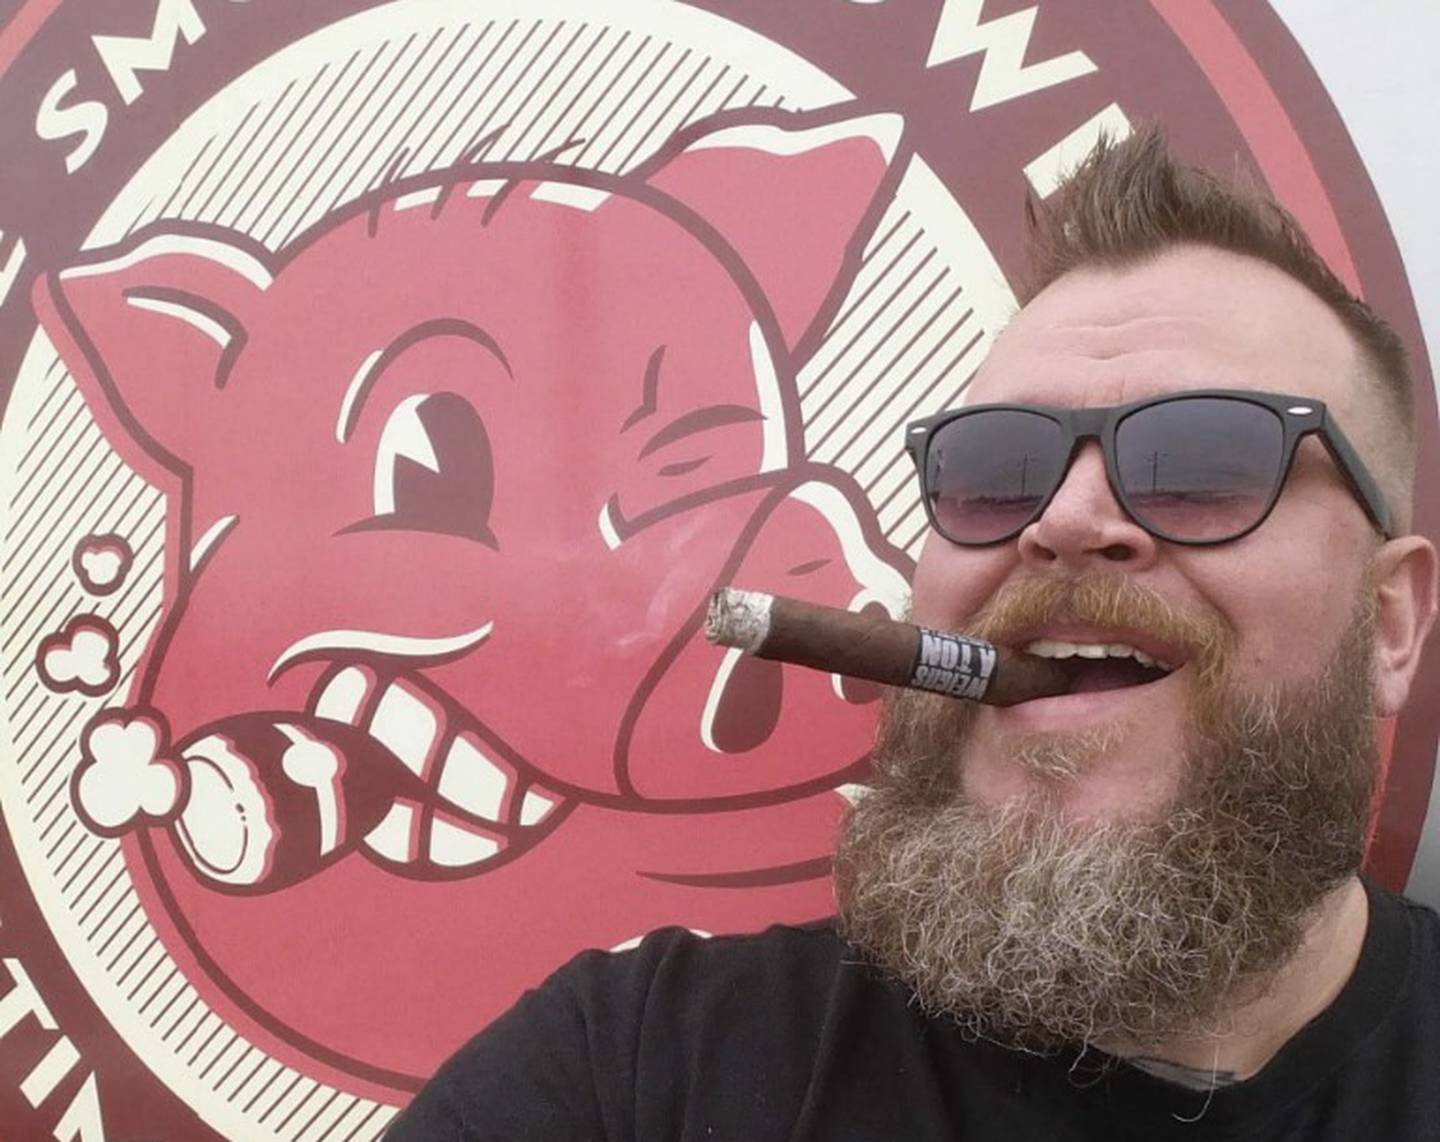 L. Drew Pumphrey appears outside his Smoking Swine food truck, chewing on a cigar.